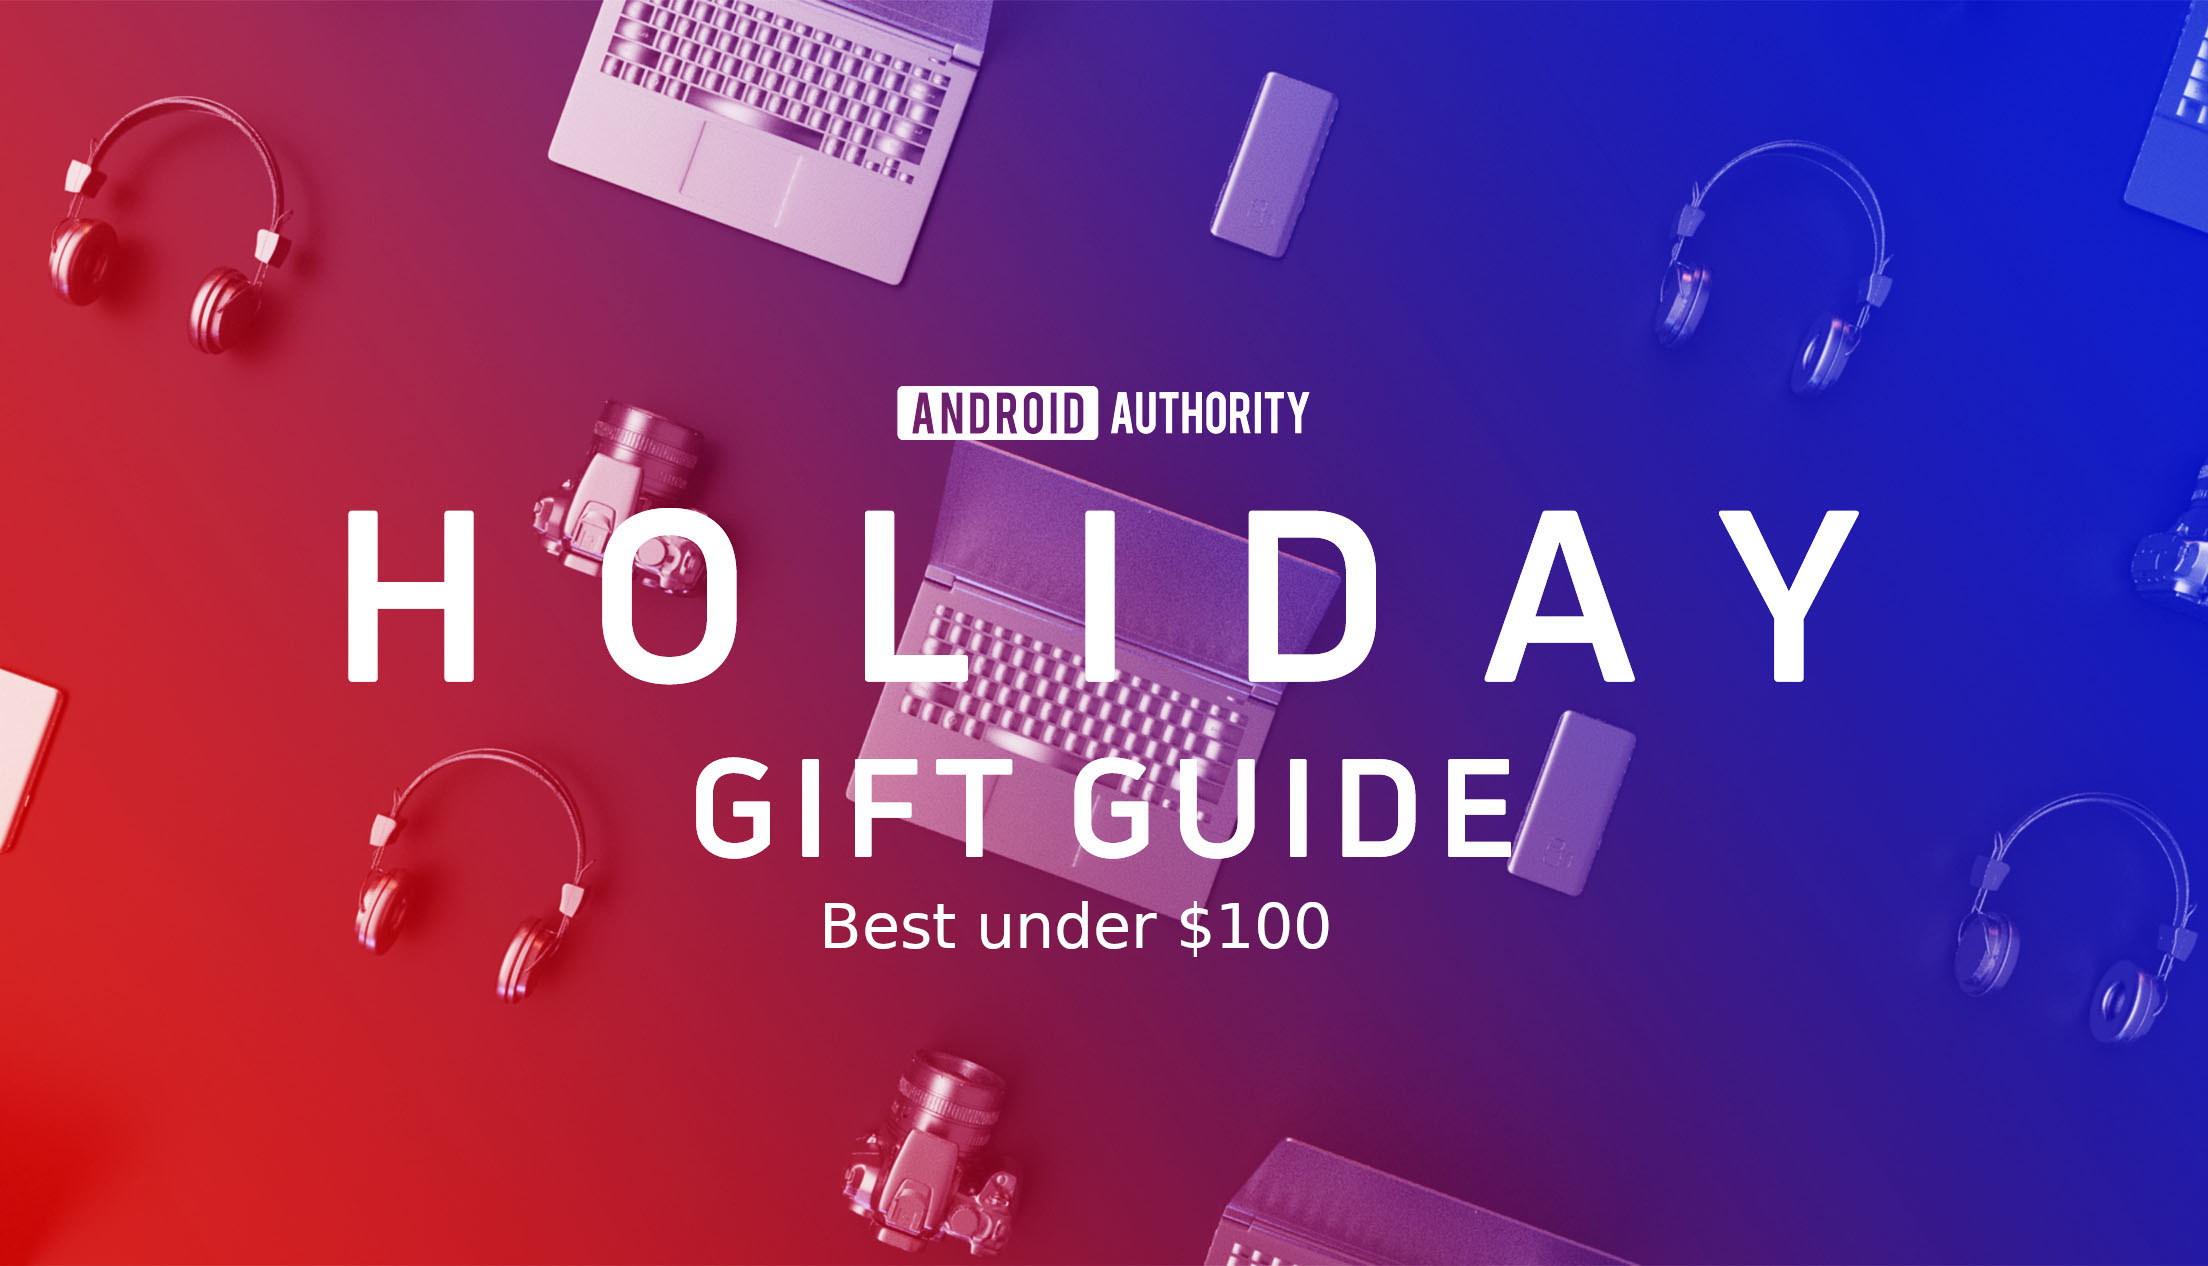 Holiday Gift Guide best under 100